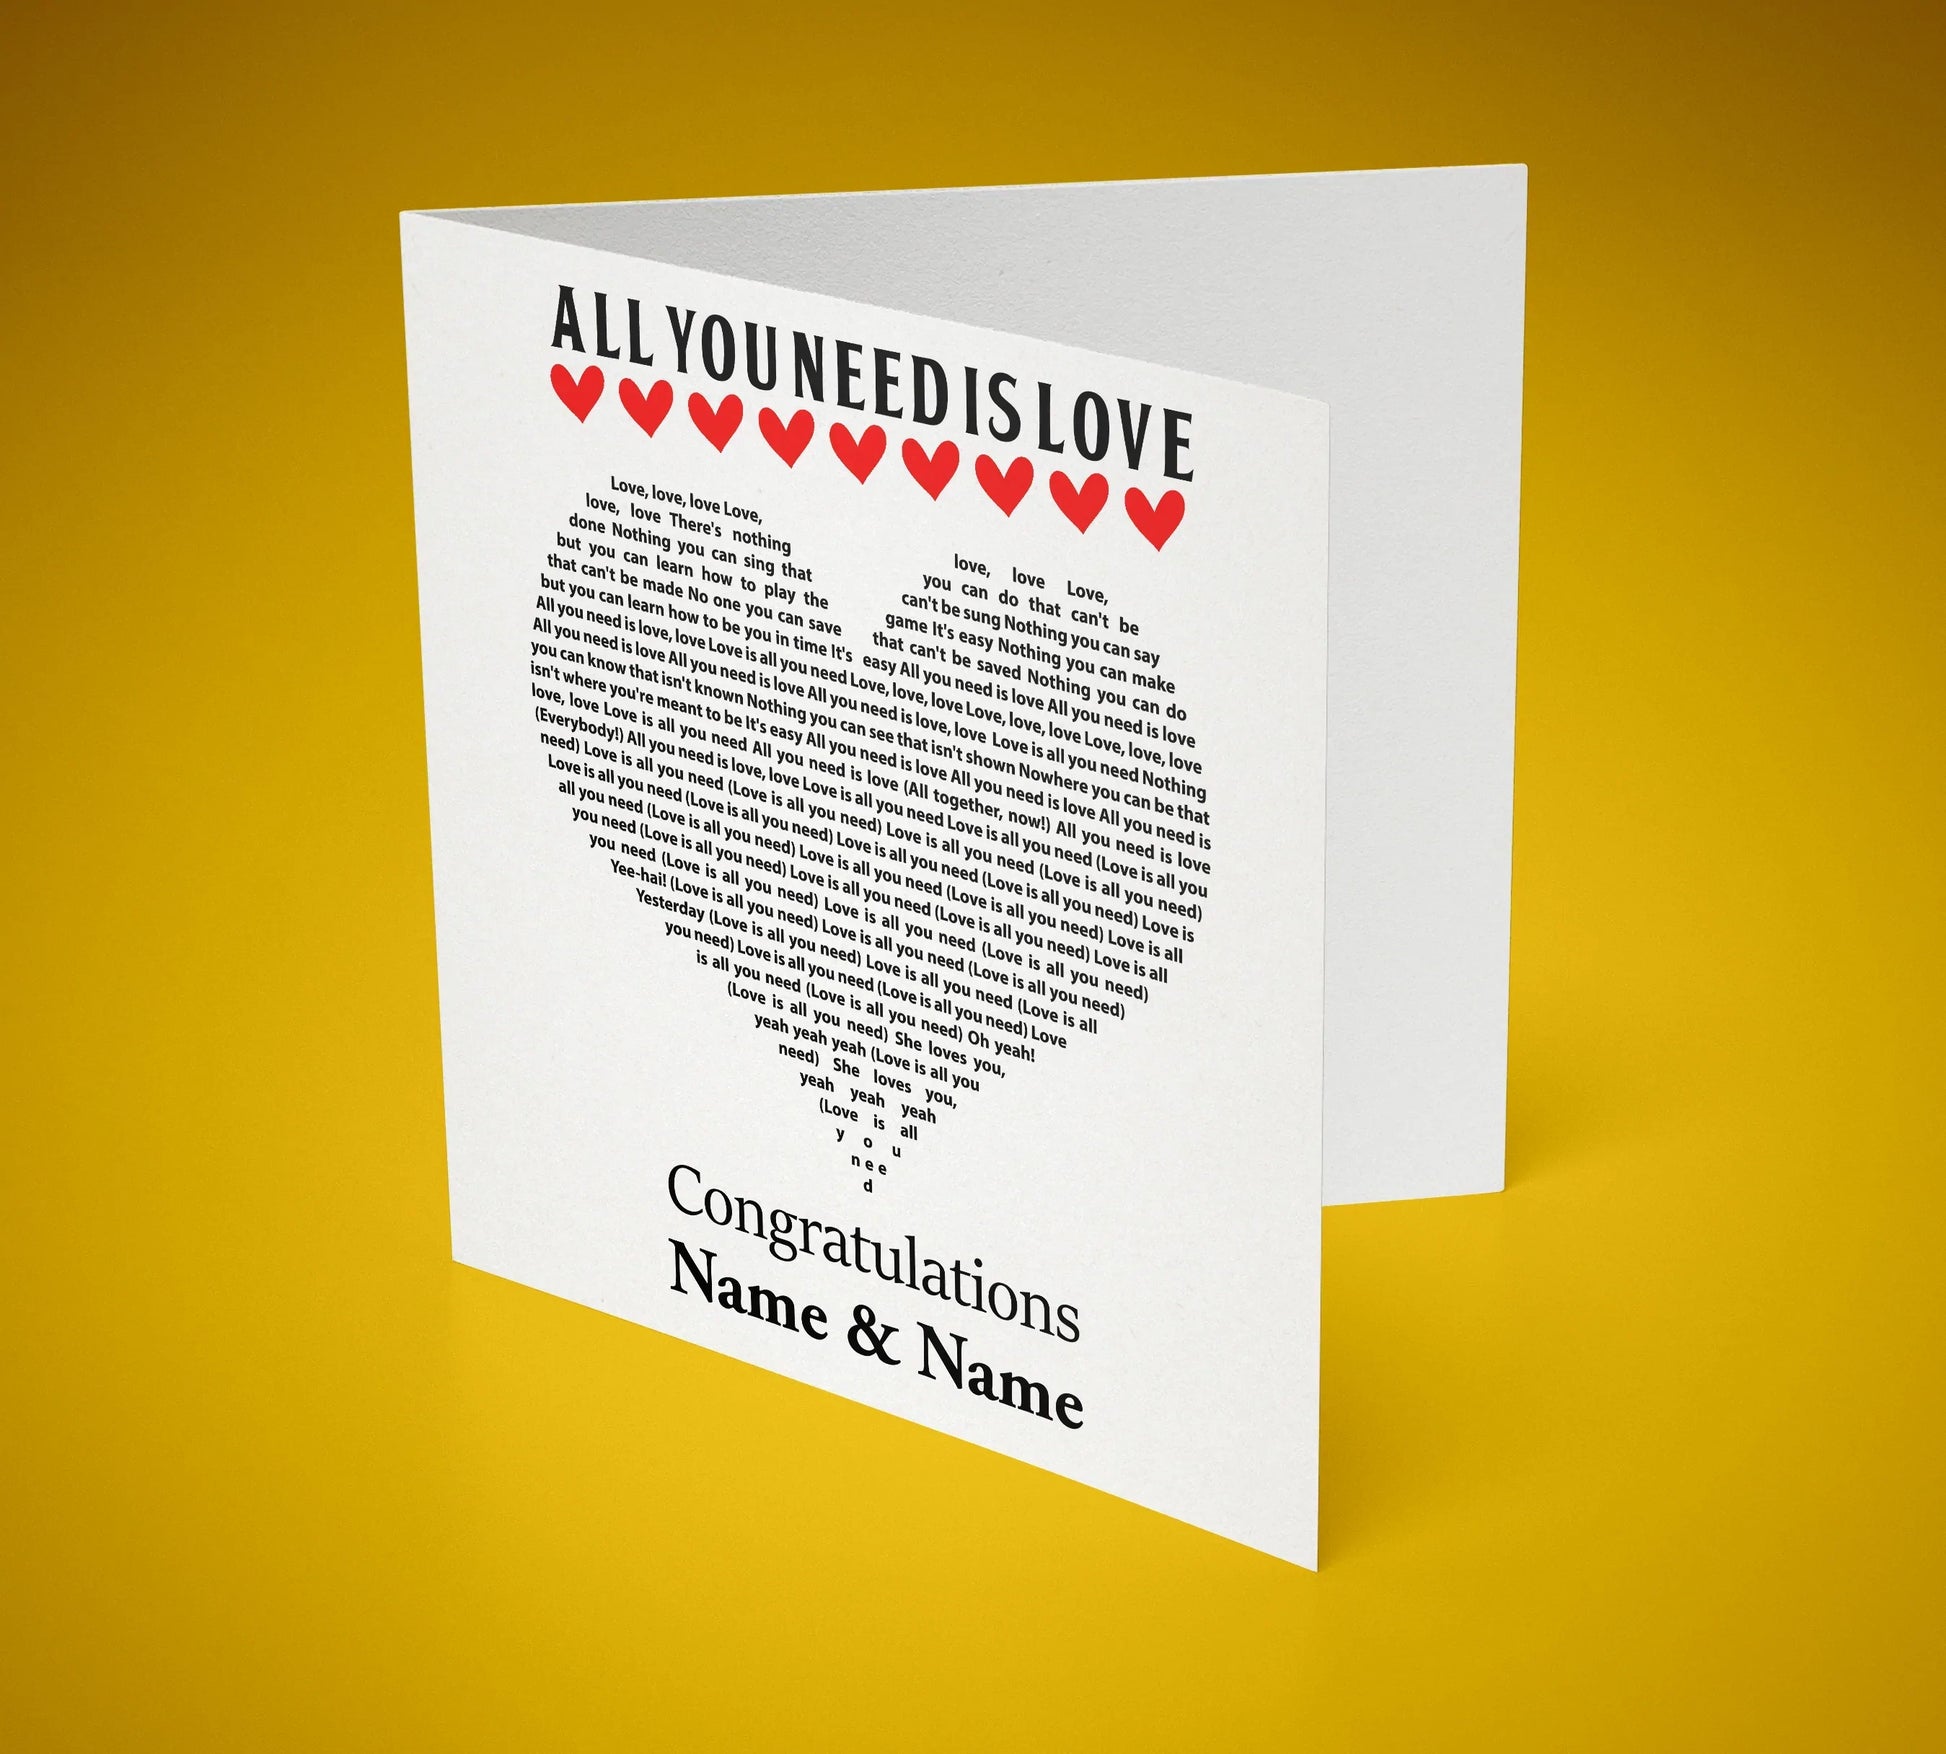 All You Need Is Love Beatles Lyrics Greeting Card 6x6in SquidPot